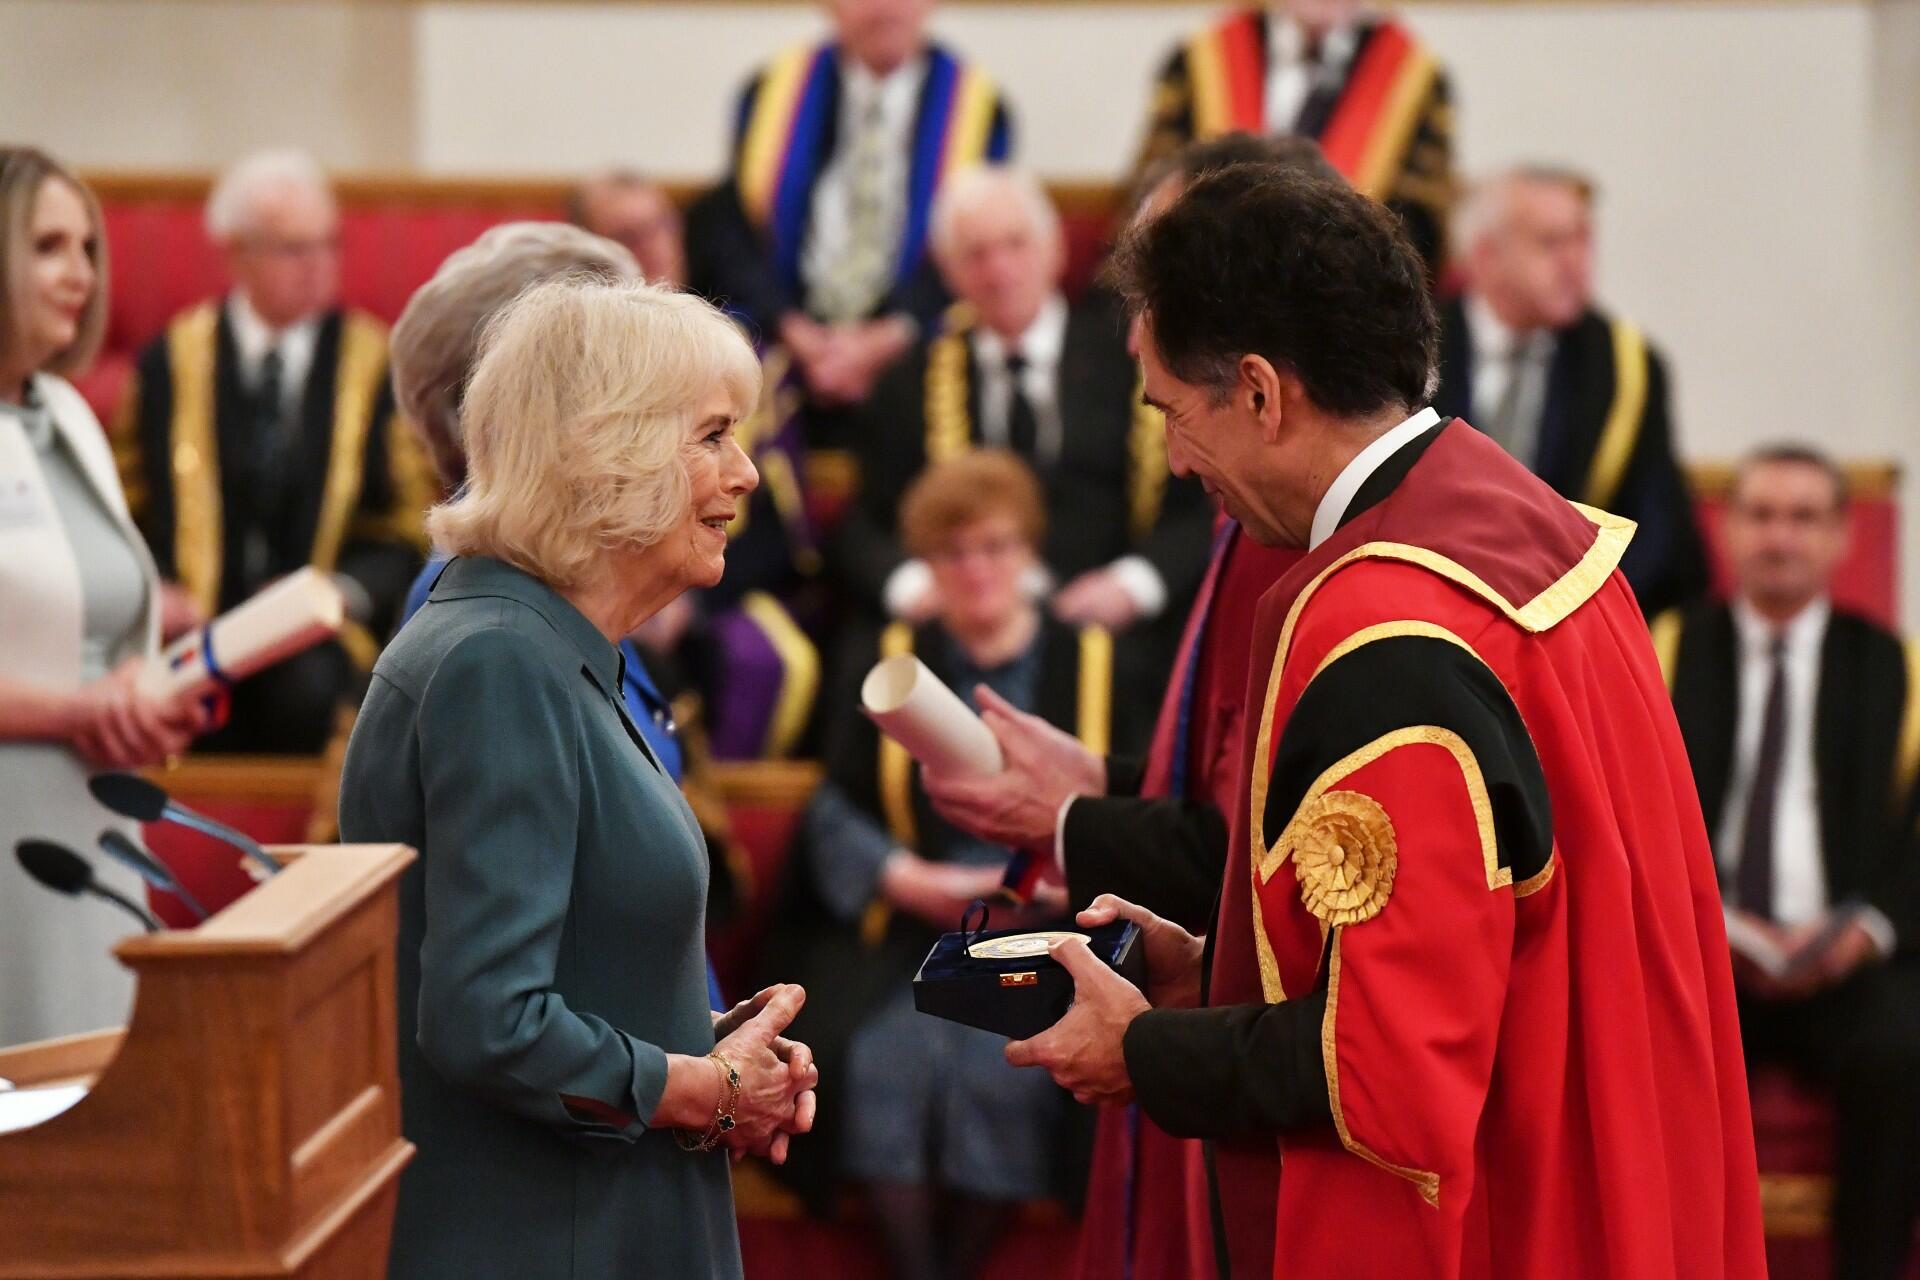 Her Majesty The Queen presents Professor David Lalloo with a Queen's Anniversary Prize